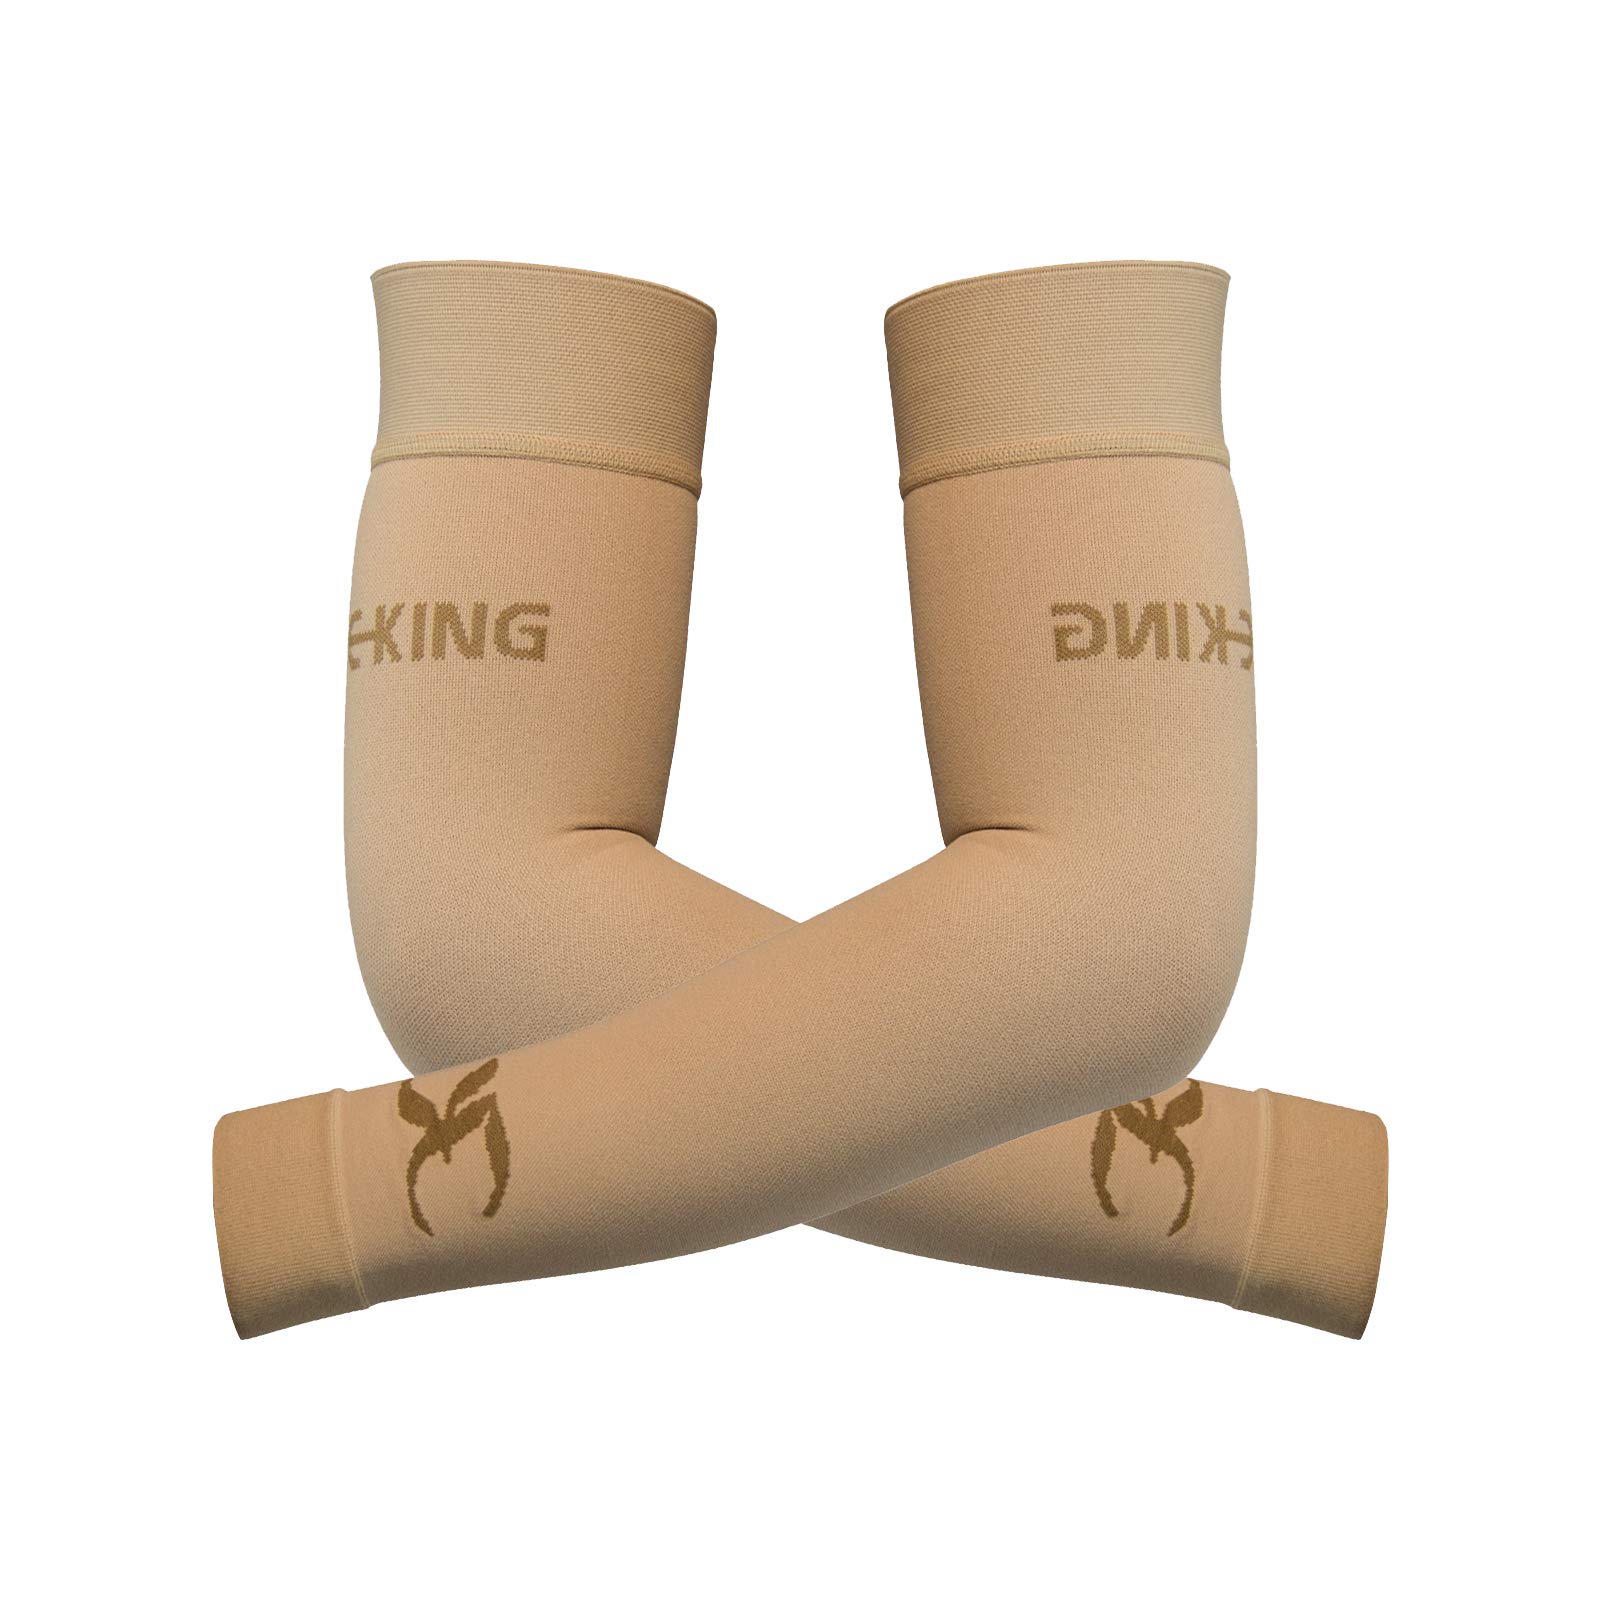 KEKING Lymphedema Compression Arm Sleeves for Men Women (Pair), No